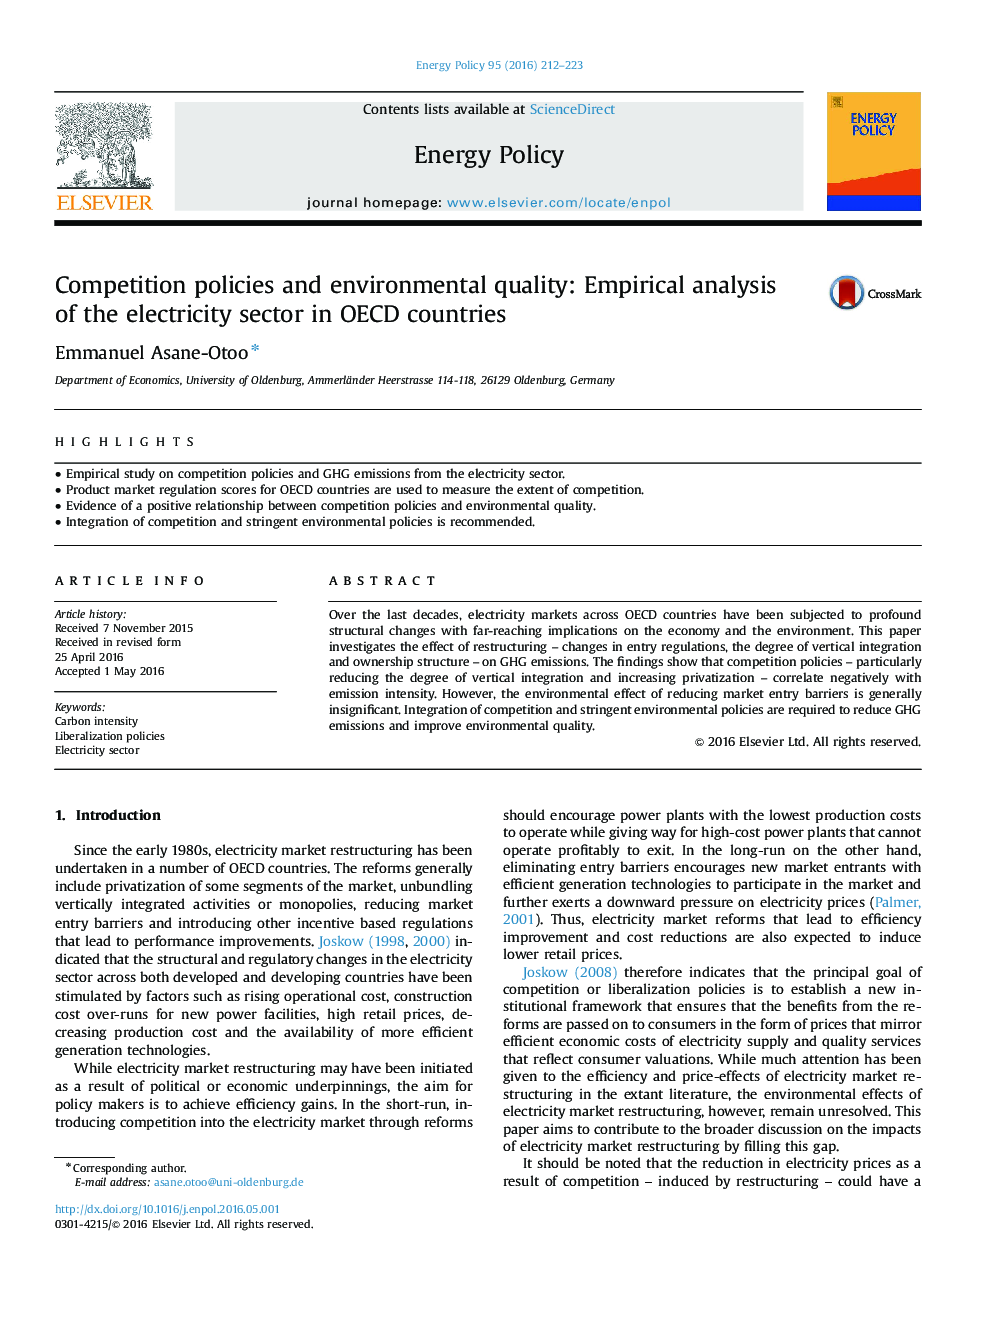 Competition policies and environmental quality: Empirical analysis of the electricity sector in OECD countries